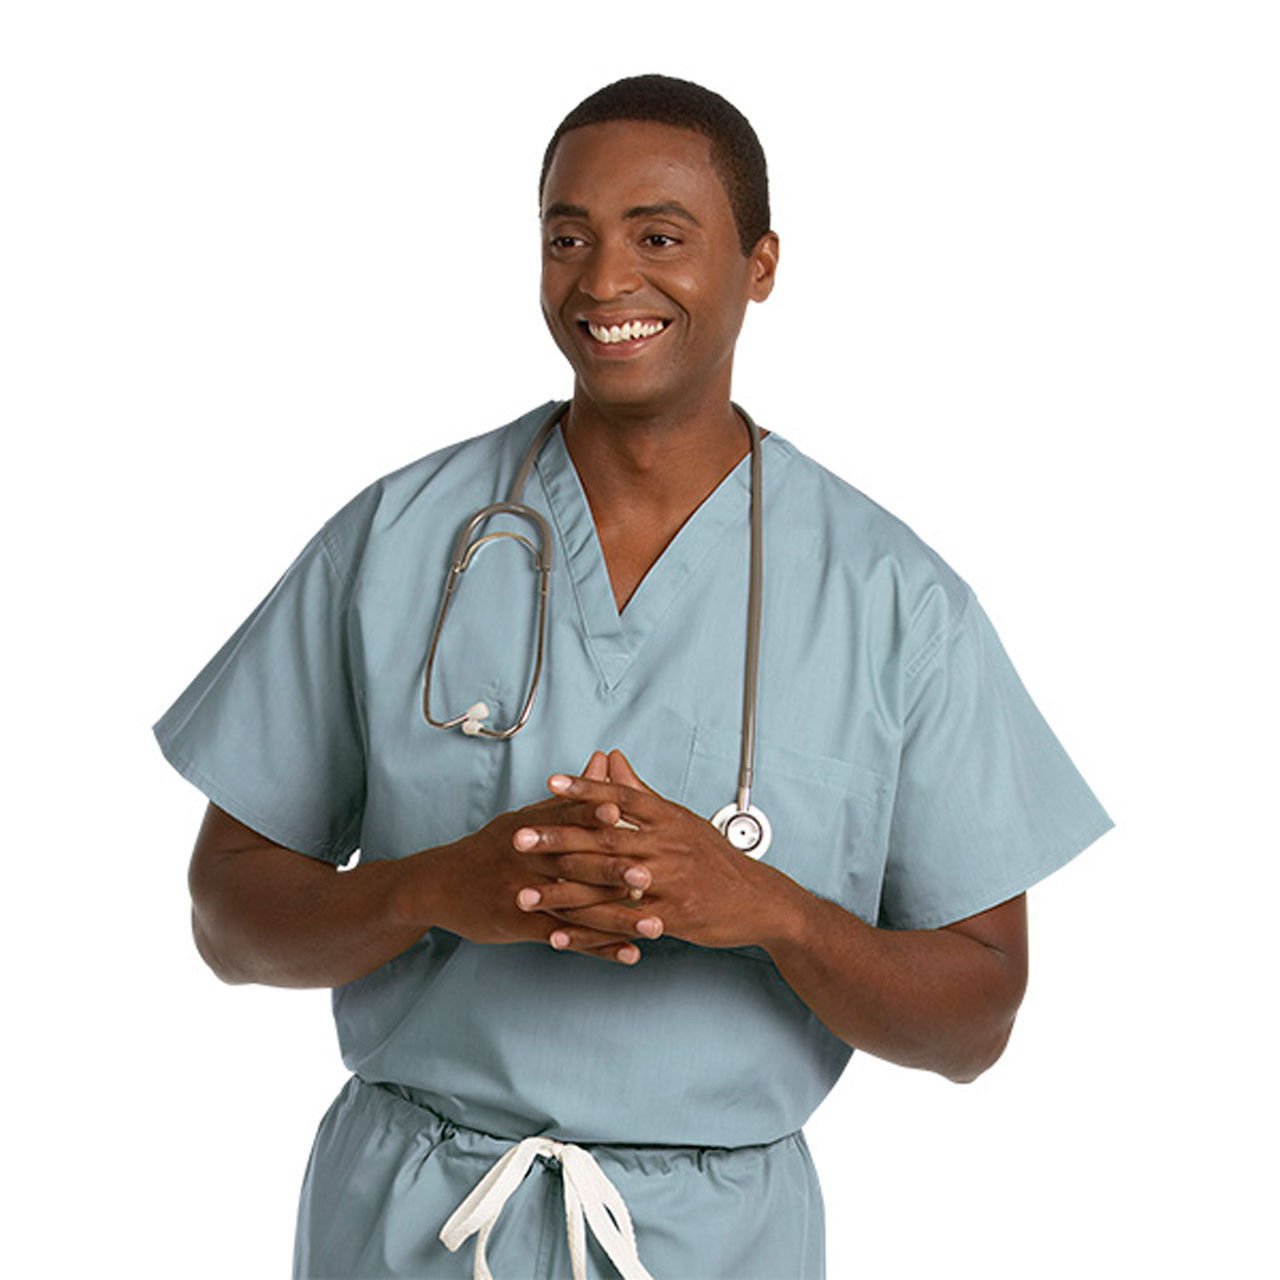 What are the exact specifications of the surgical scrubs in Misty Green?